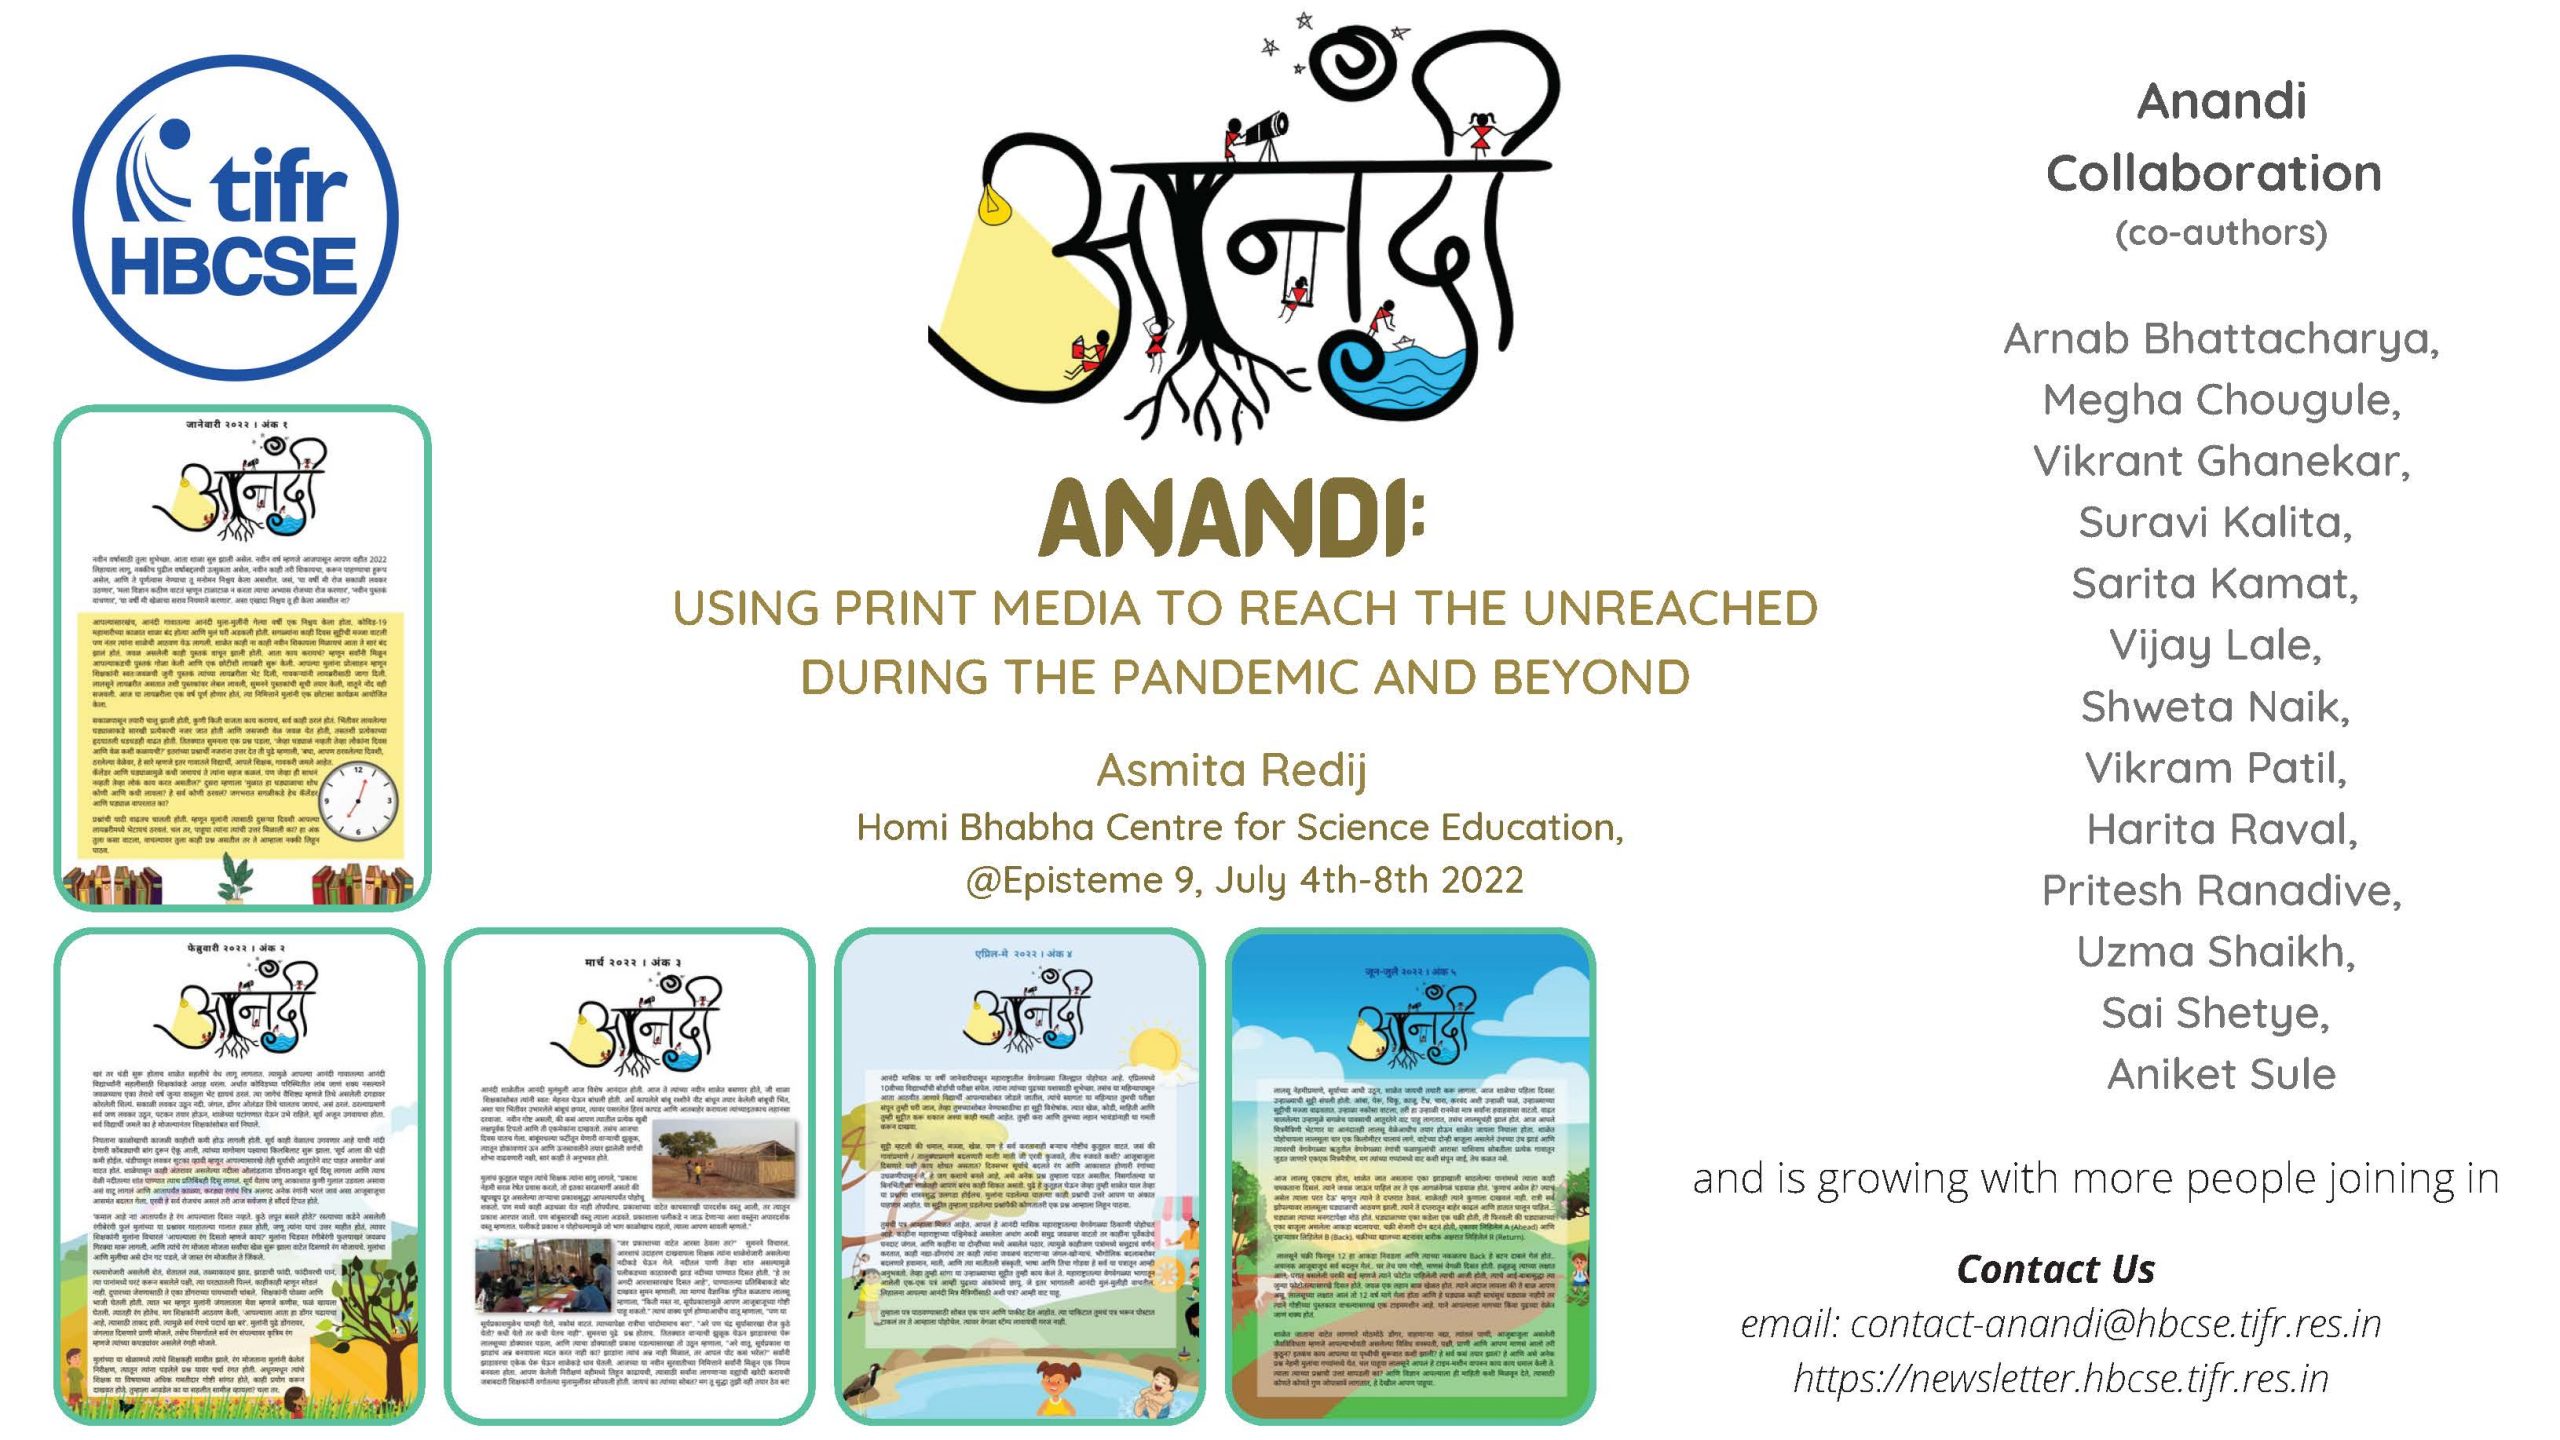 ANANDI: USING PRINT MEDIA TO REACH THE UNREACHED DURING THE PANDEMIC AND BEYOND